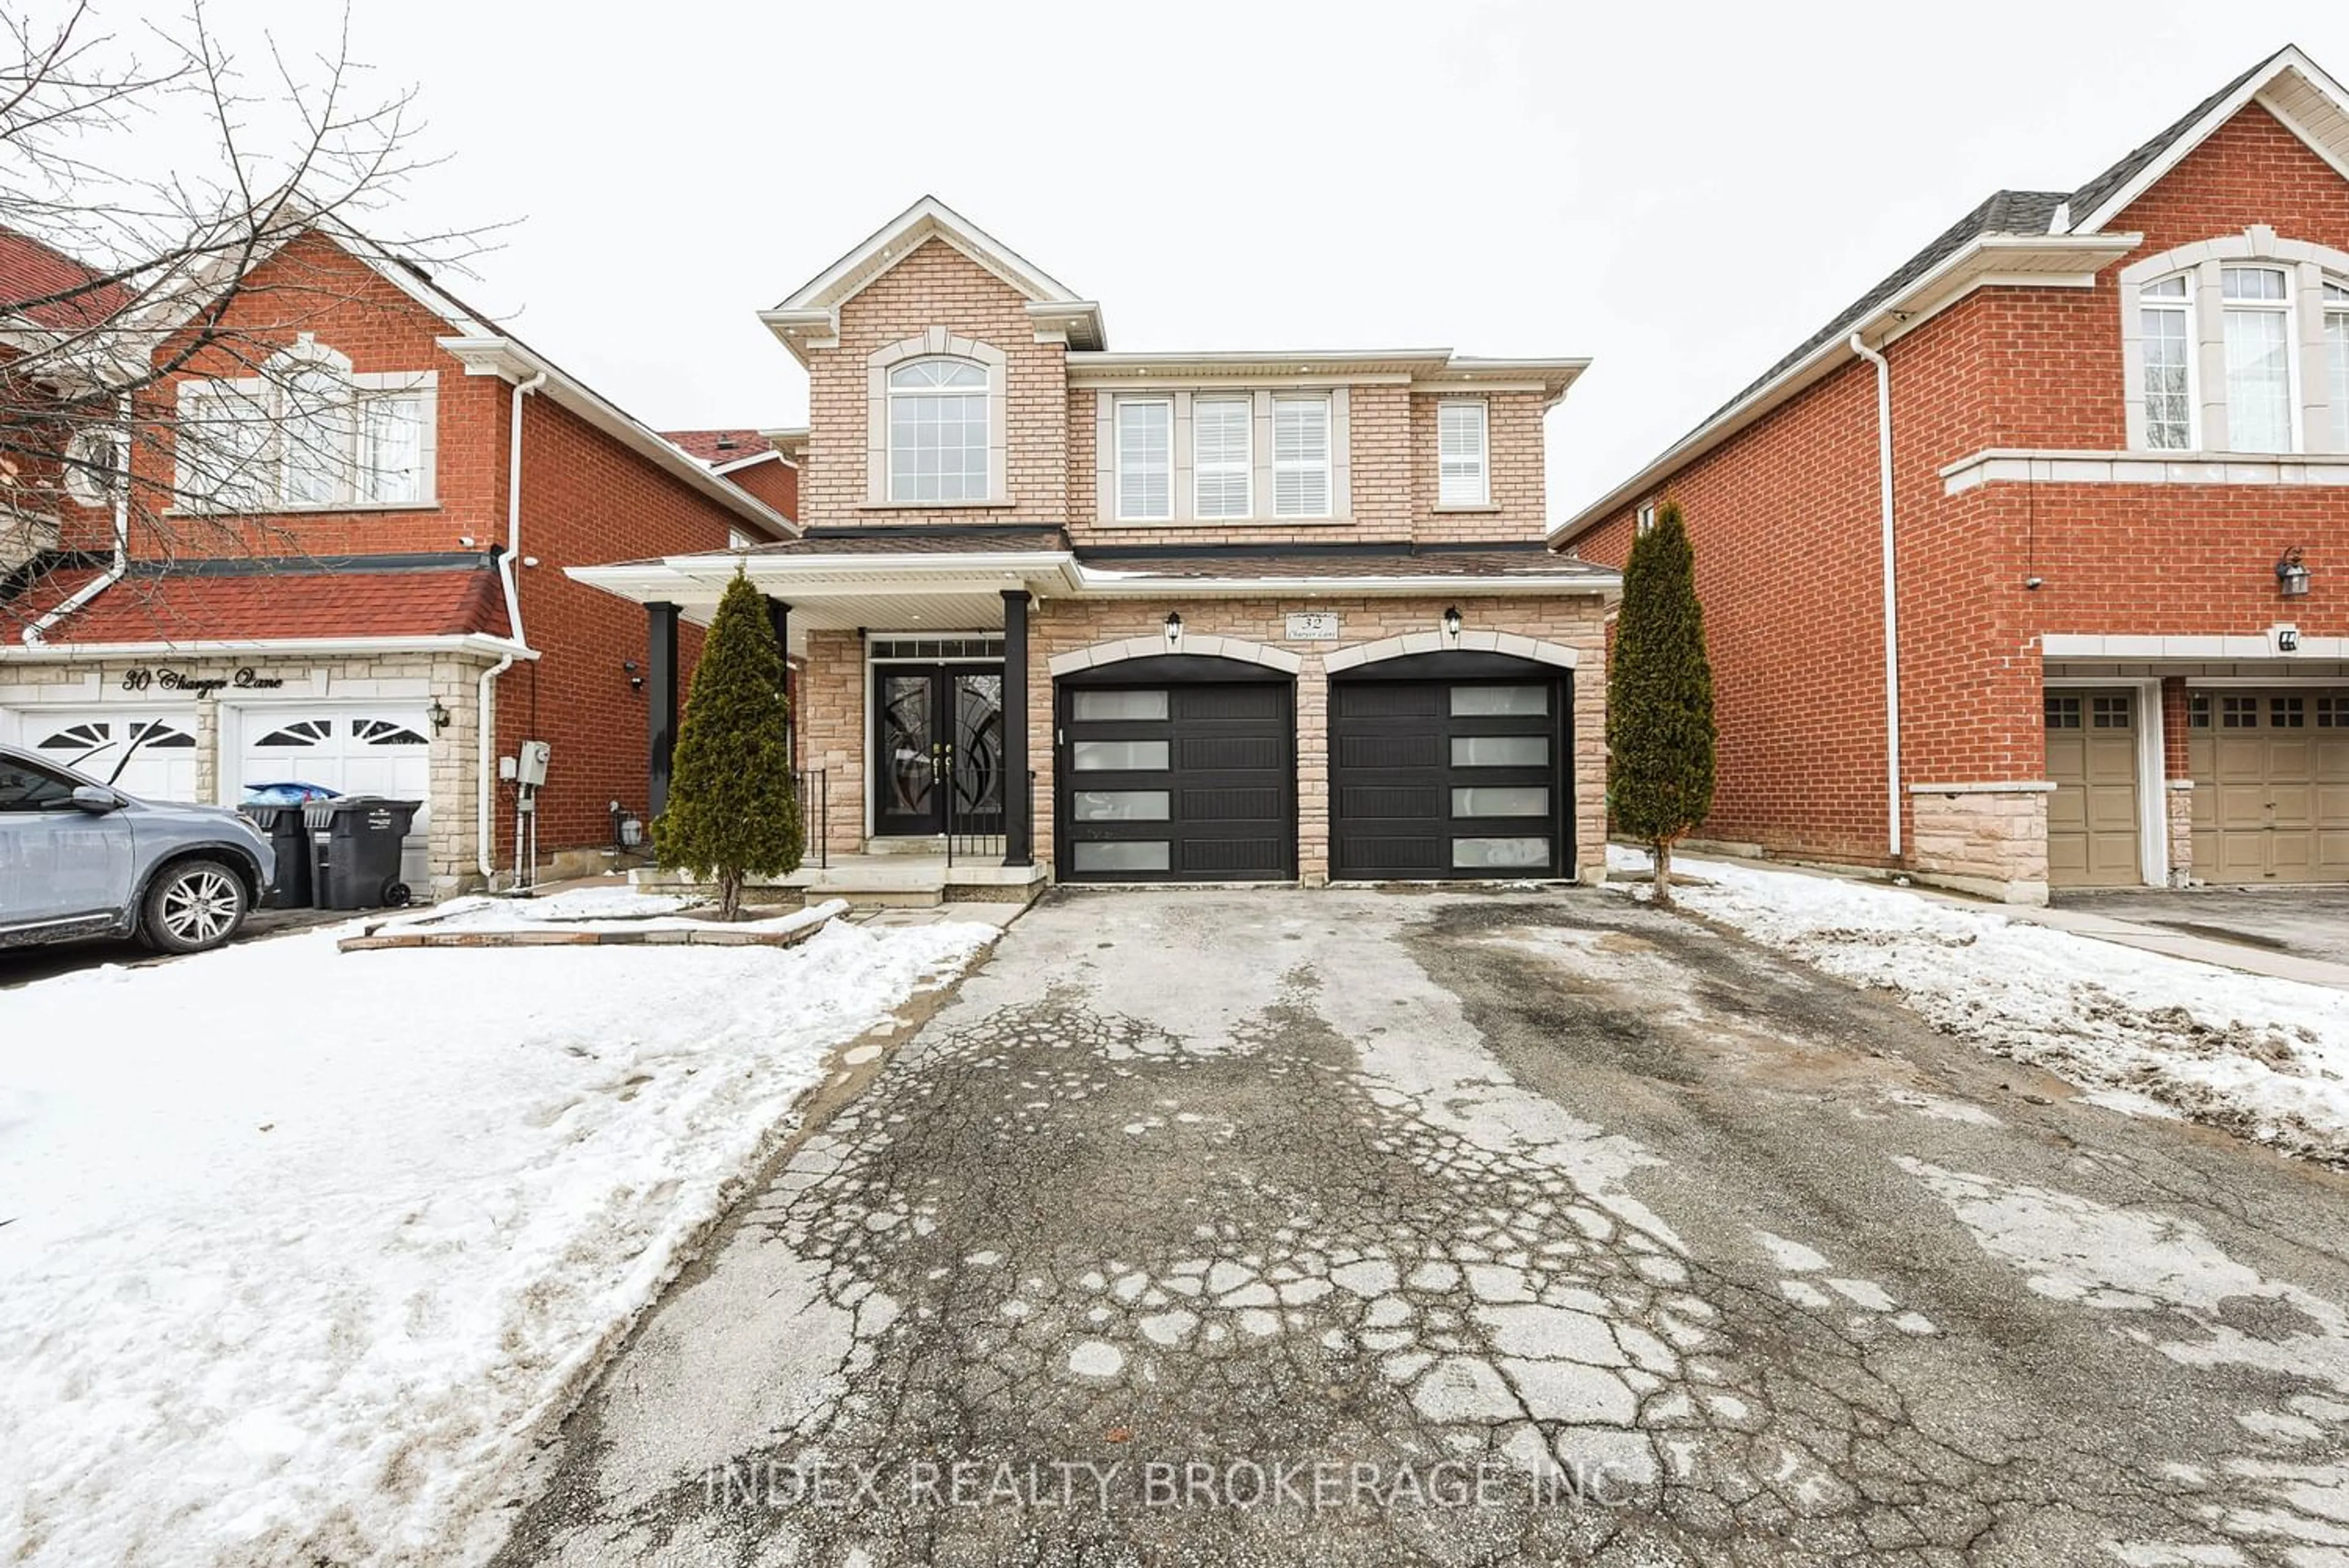 Home with brick exterior material for 32 Charger Lane, Brampton Ontario L7A 3C1